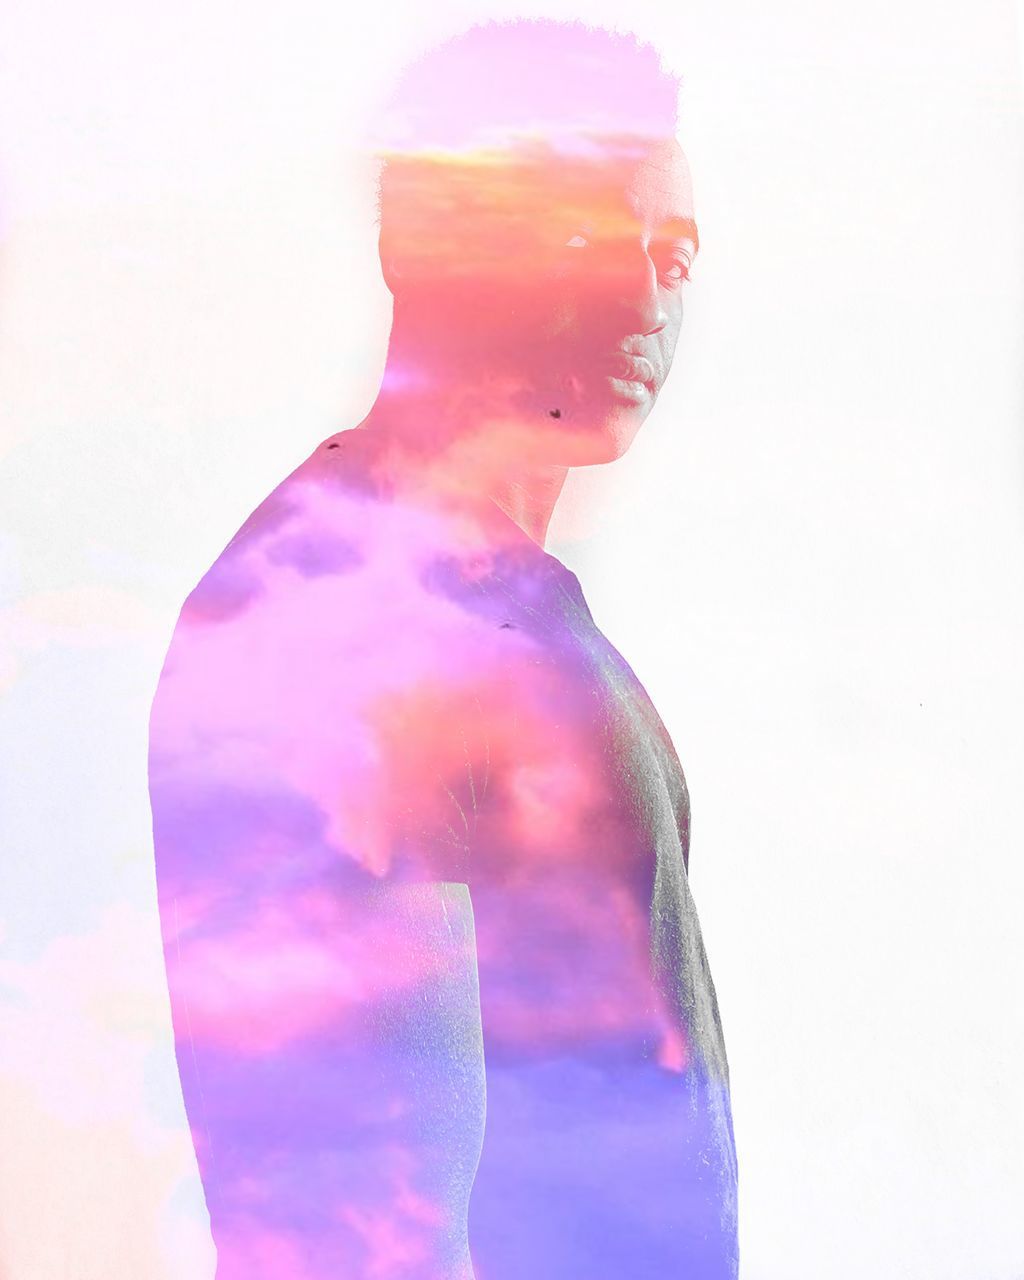 DIGITAL COMPOSITE IMAGE OF MAN AGAINST CLOUDS OVER WHITE BACKGROUND